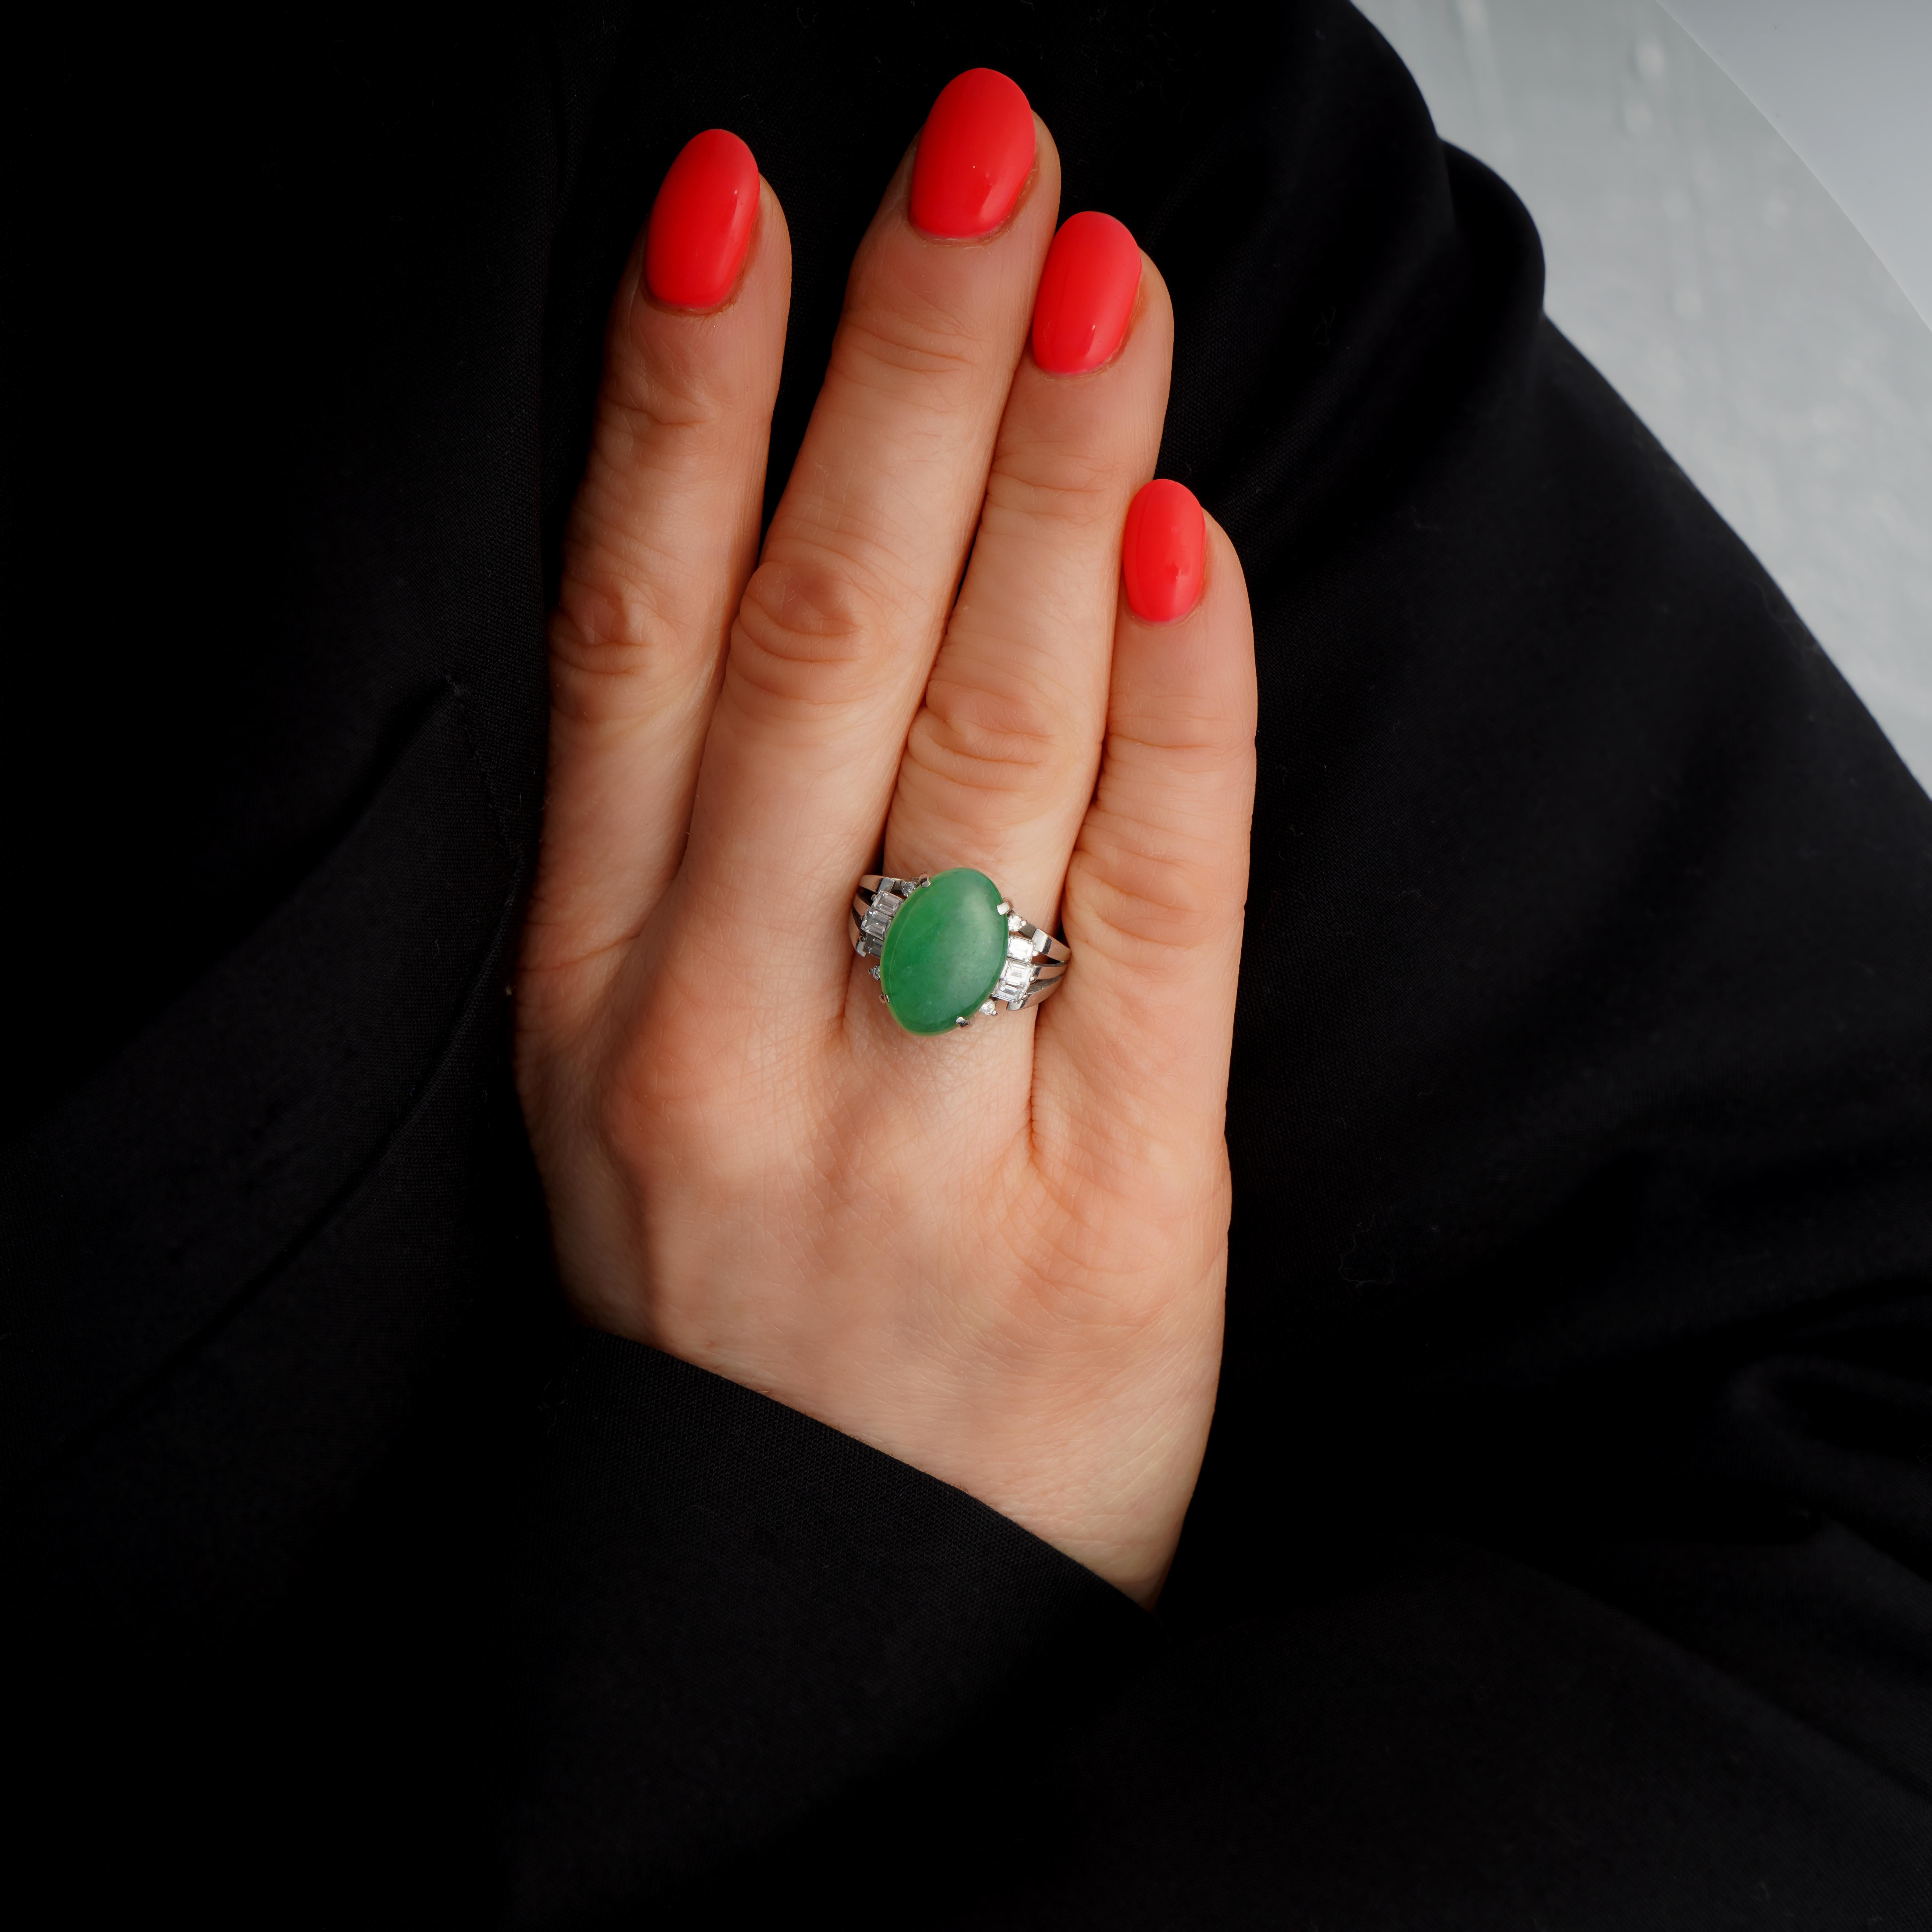 Ladies' ring made of 900. platinum with A grade Jade and surrounded by round brilliant and baguette-cut diamonds. 
A stunning A grade jade stone weighing an astounding 4.77 carats sits in the heart of the ring. 

Jade has a long and intriguing